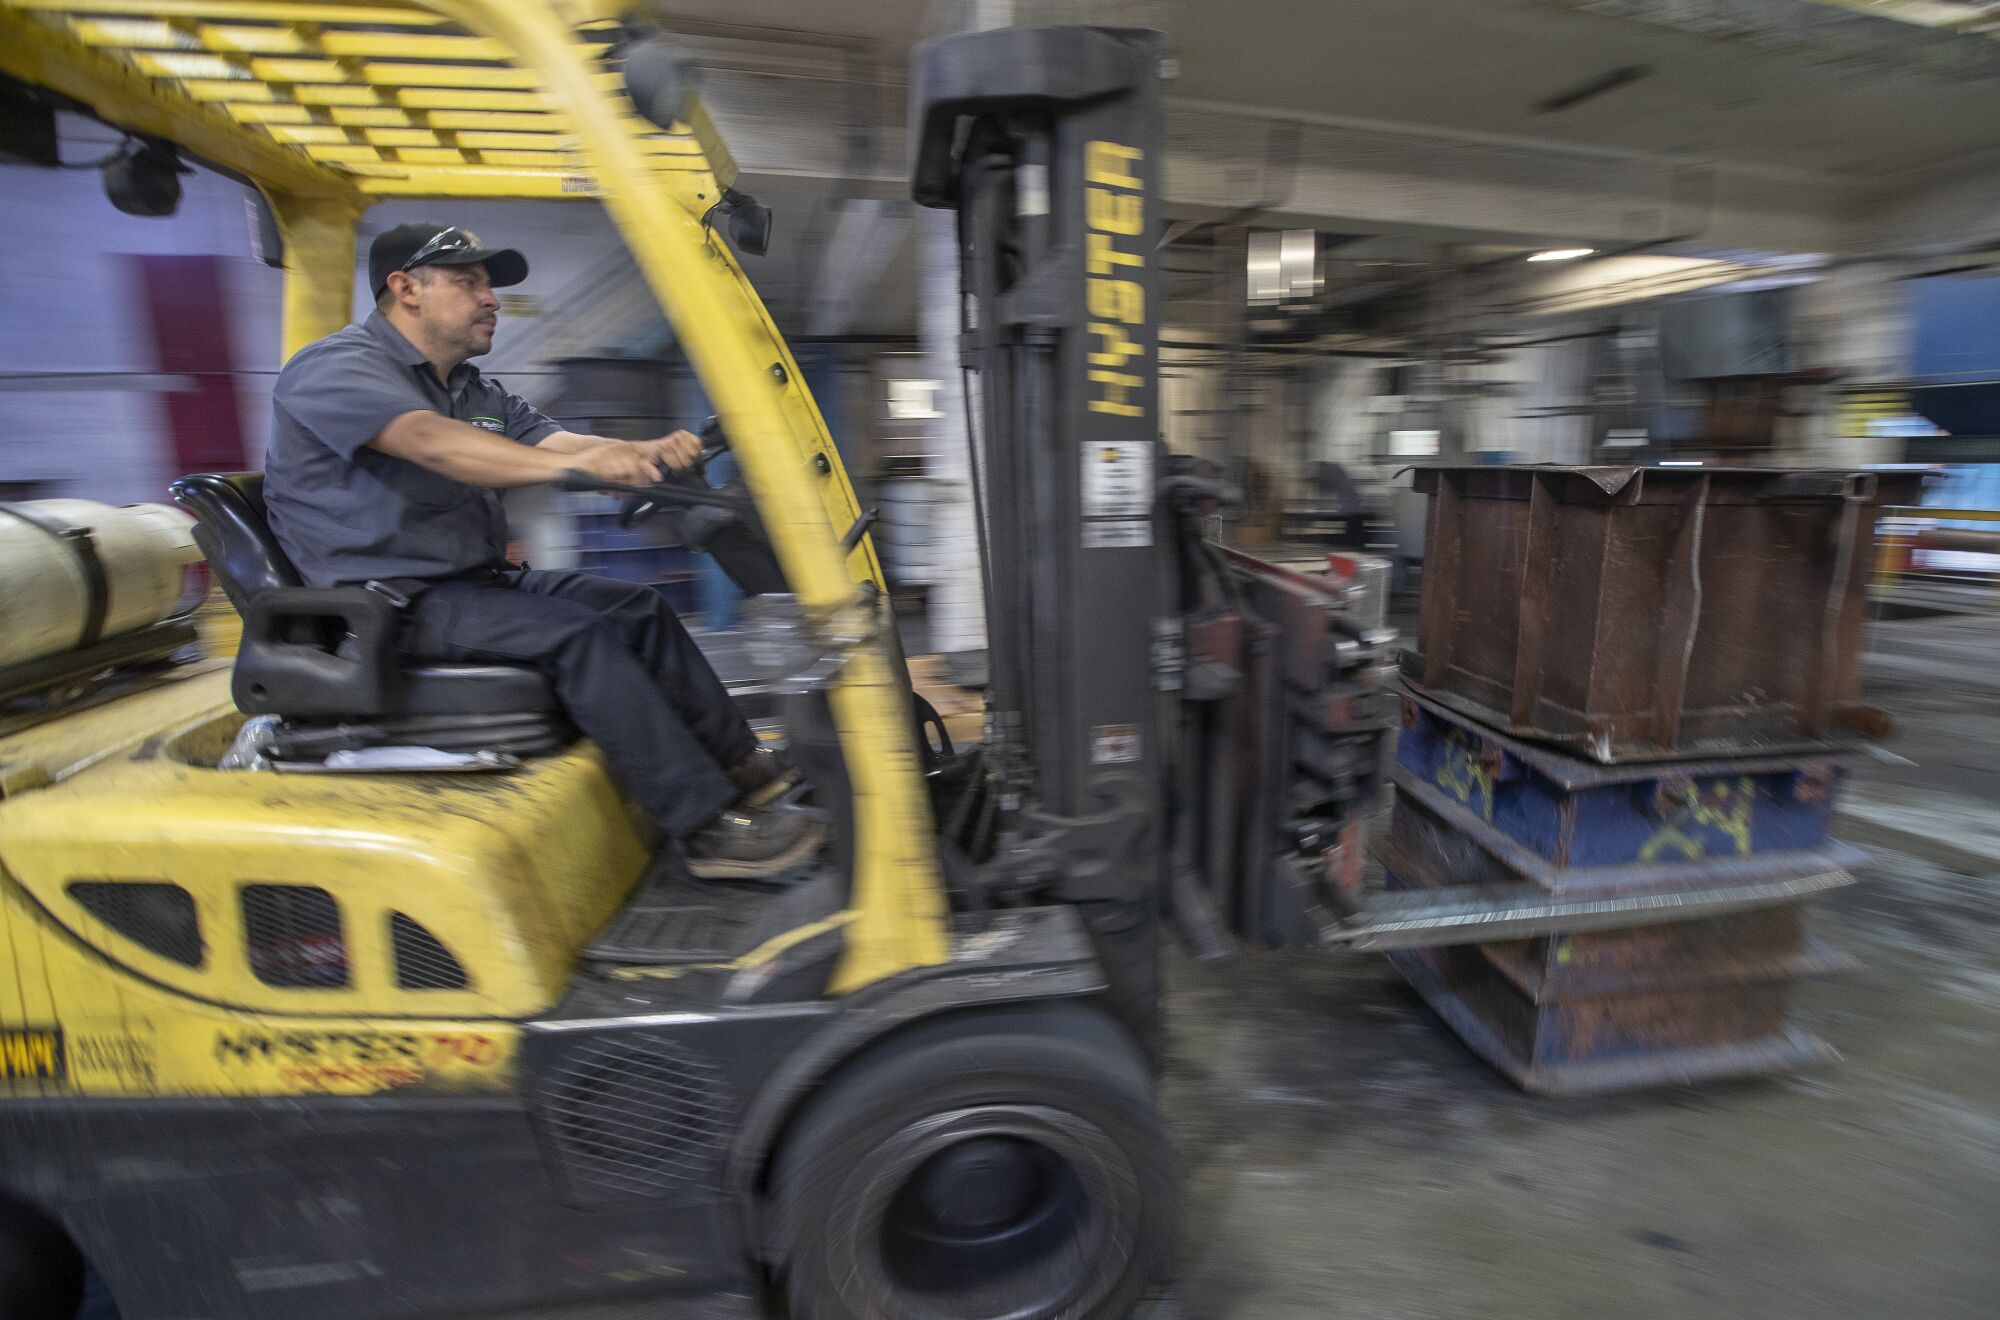 Carlos Arceo, 39, a 2nd shift manager at U.S. Rubber Recycling, operates a fork lift inside the production floor.